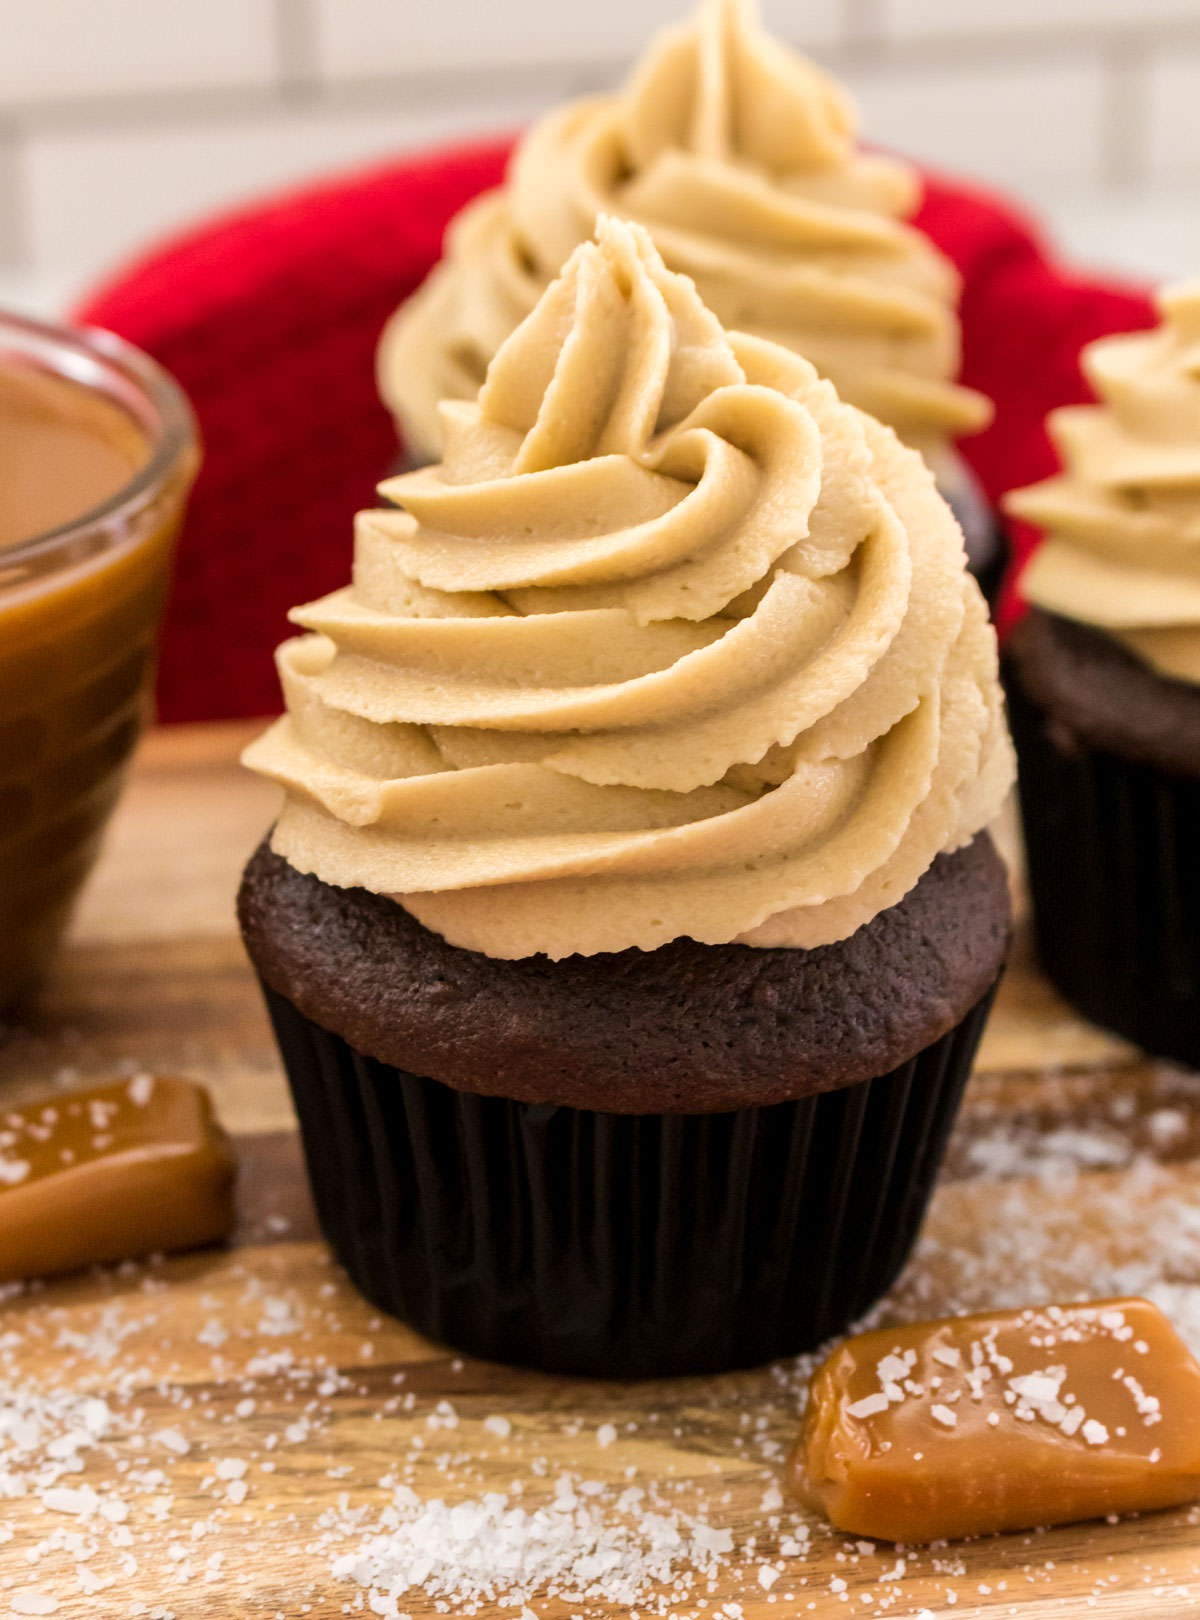 Closeup on three chocolate cupcakes topped with The Best Salted Caramel Buttercream Frosting sitting on a cutting board surrounded by Sea Salt and Caramel candies.